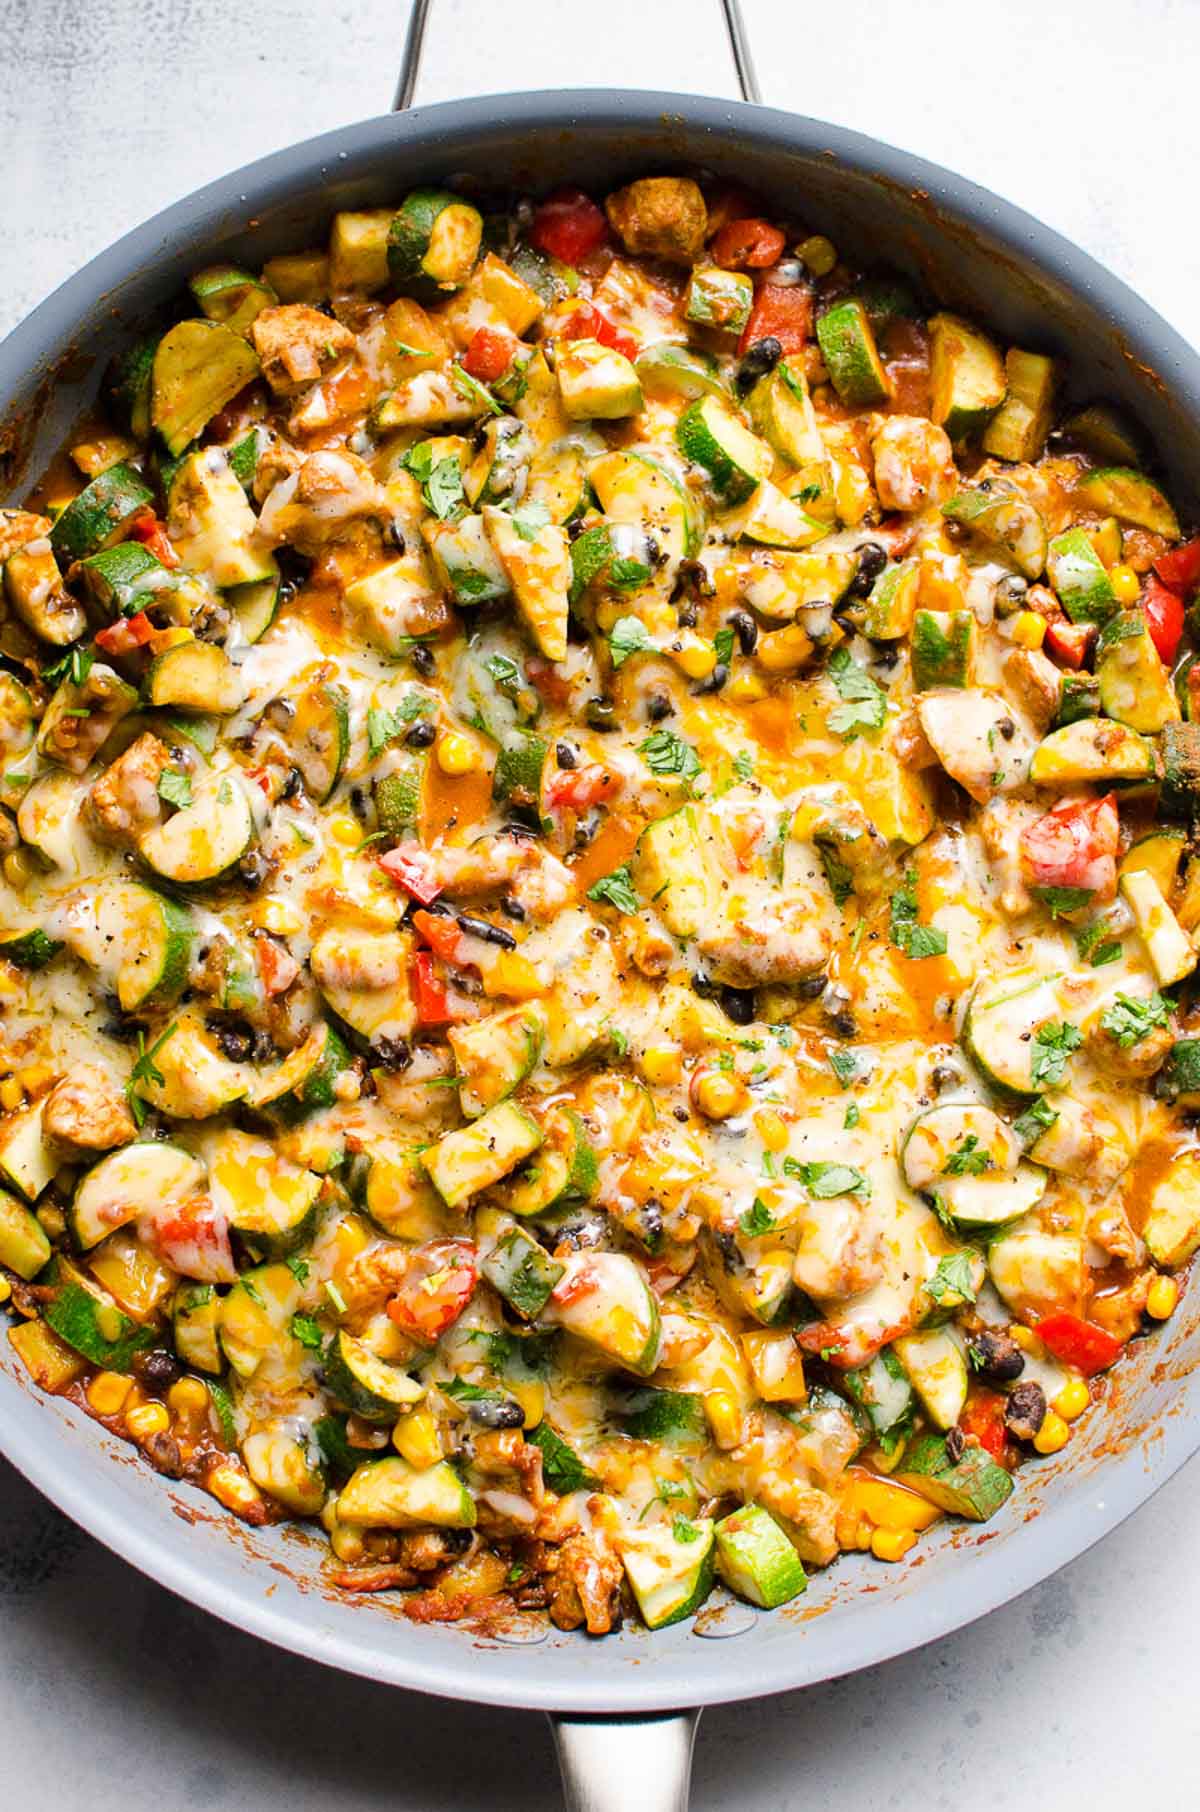 Tex mex chicken and zucchini with melted cheese on top in a gray skillet.